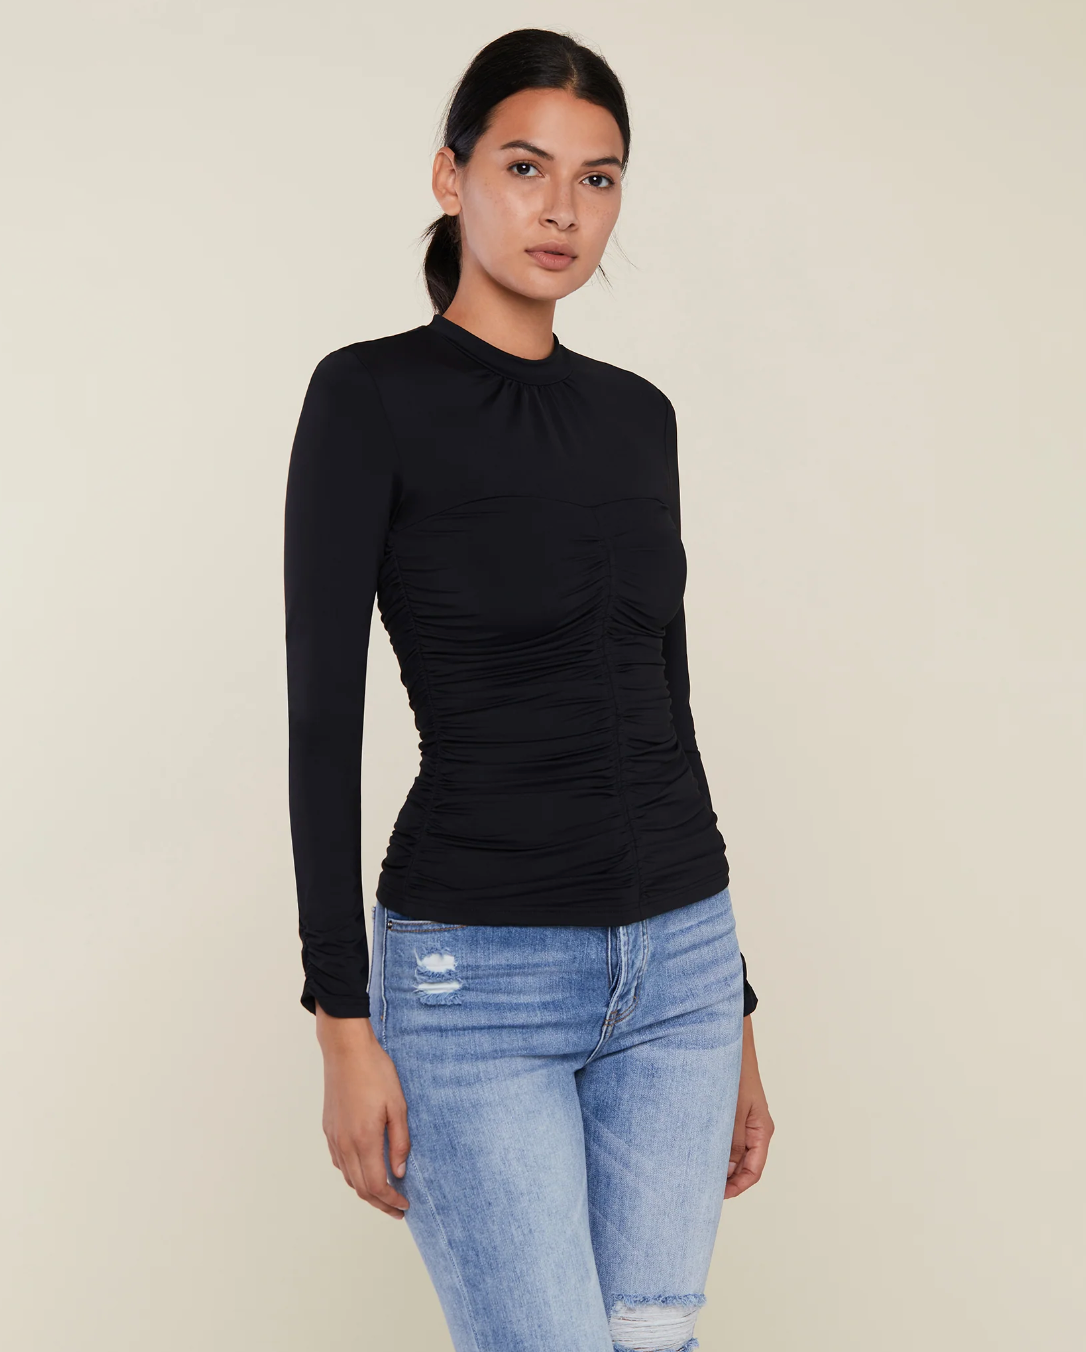 Photo of model wearing Long Sleeve Ruched Mock Neck in black from Rachel Parcell available at UniKoncept in Waterloo